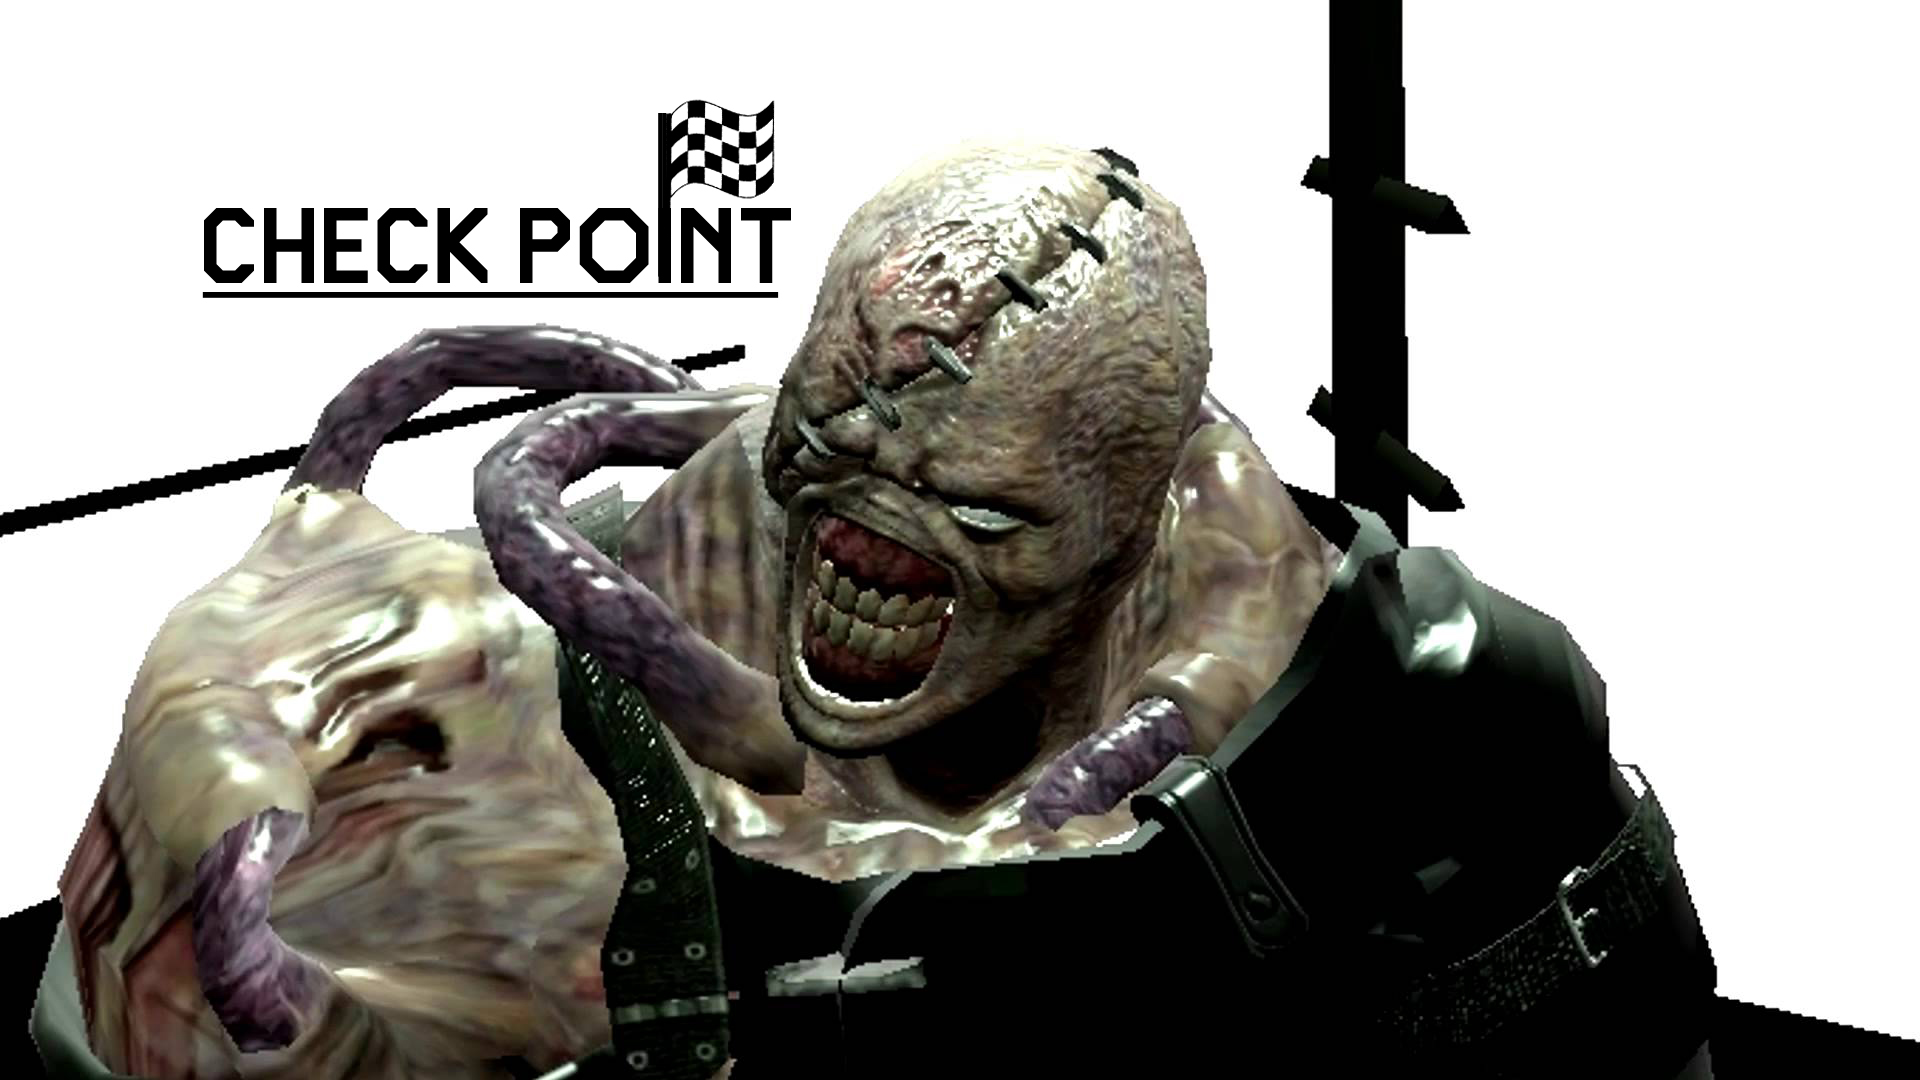 Check-Point